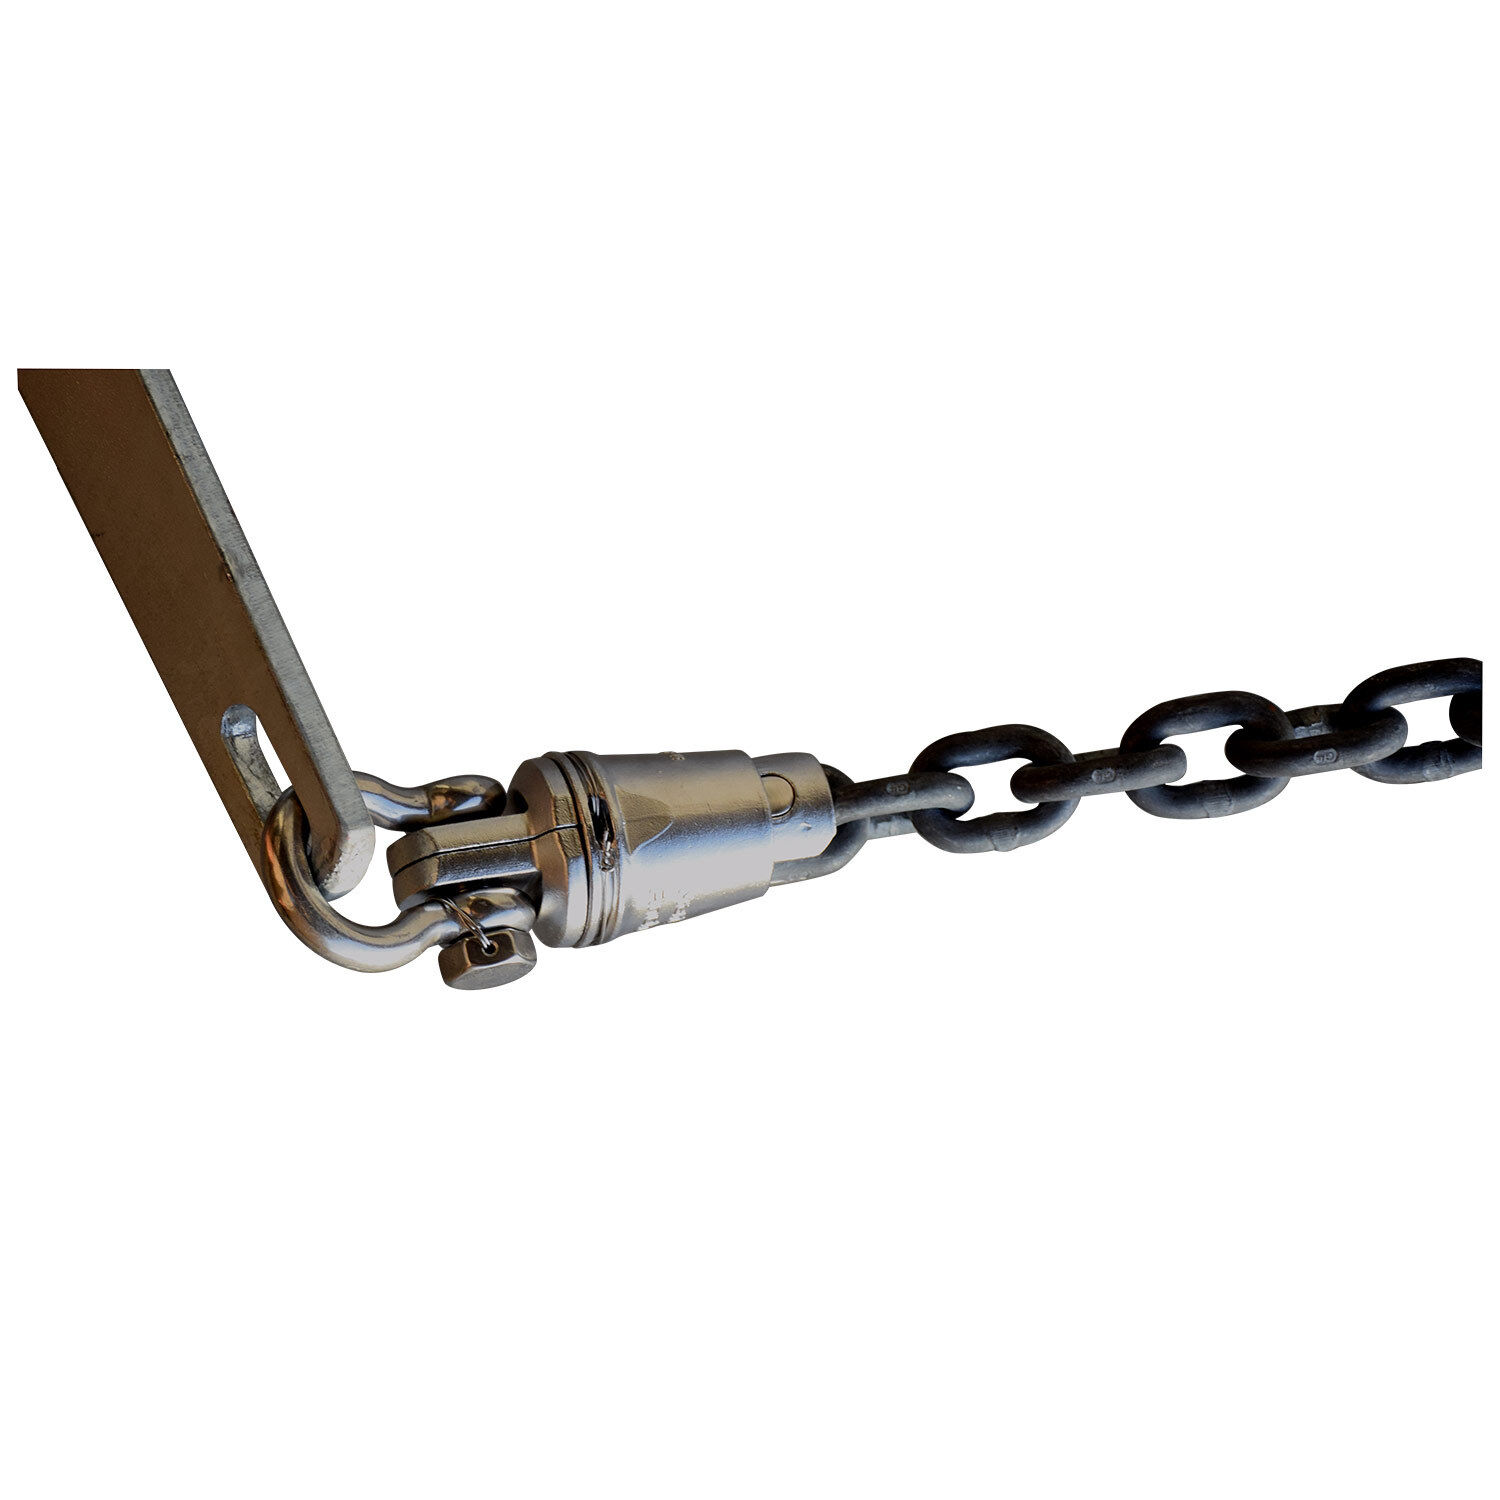 Swivel, Stainless Steel, Integrated Shackle, 1/4 to 5/16